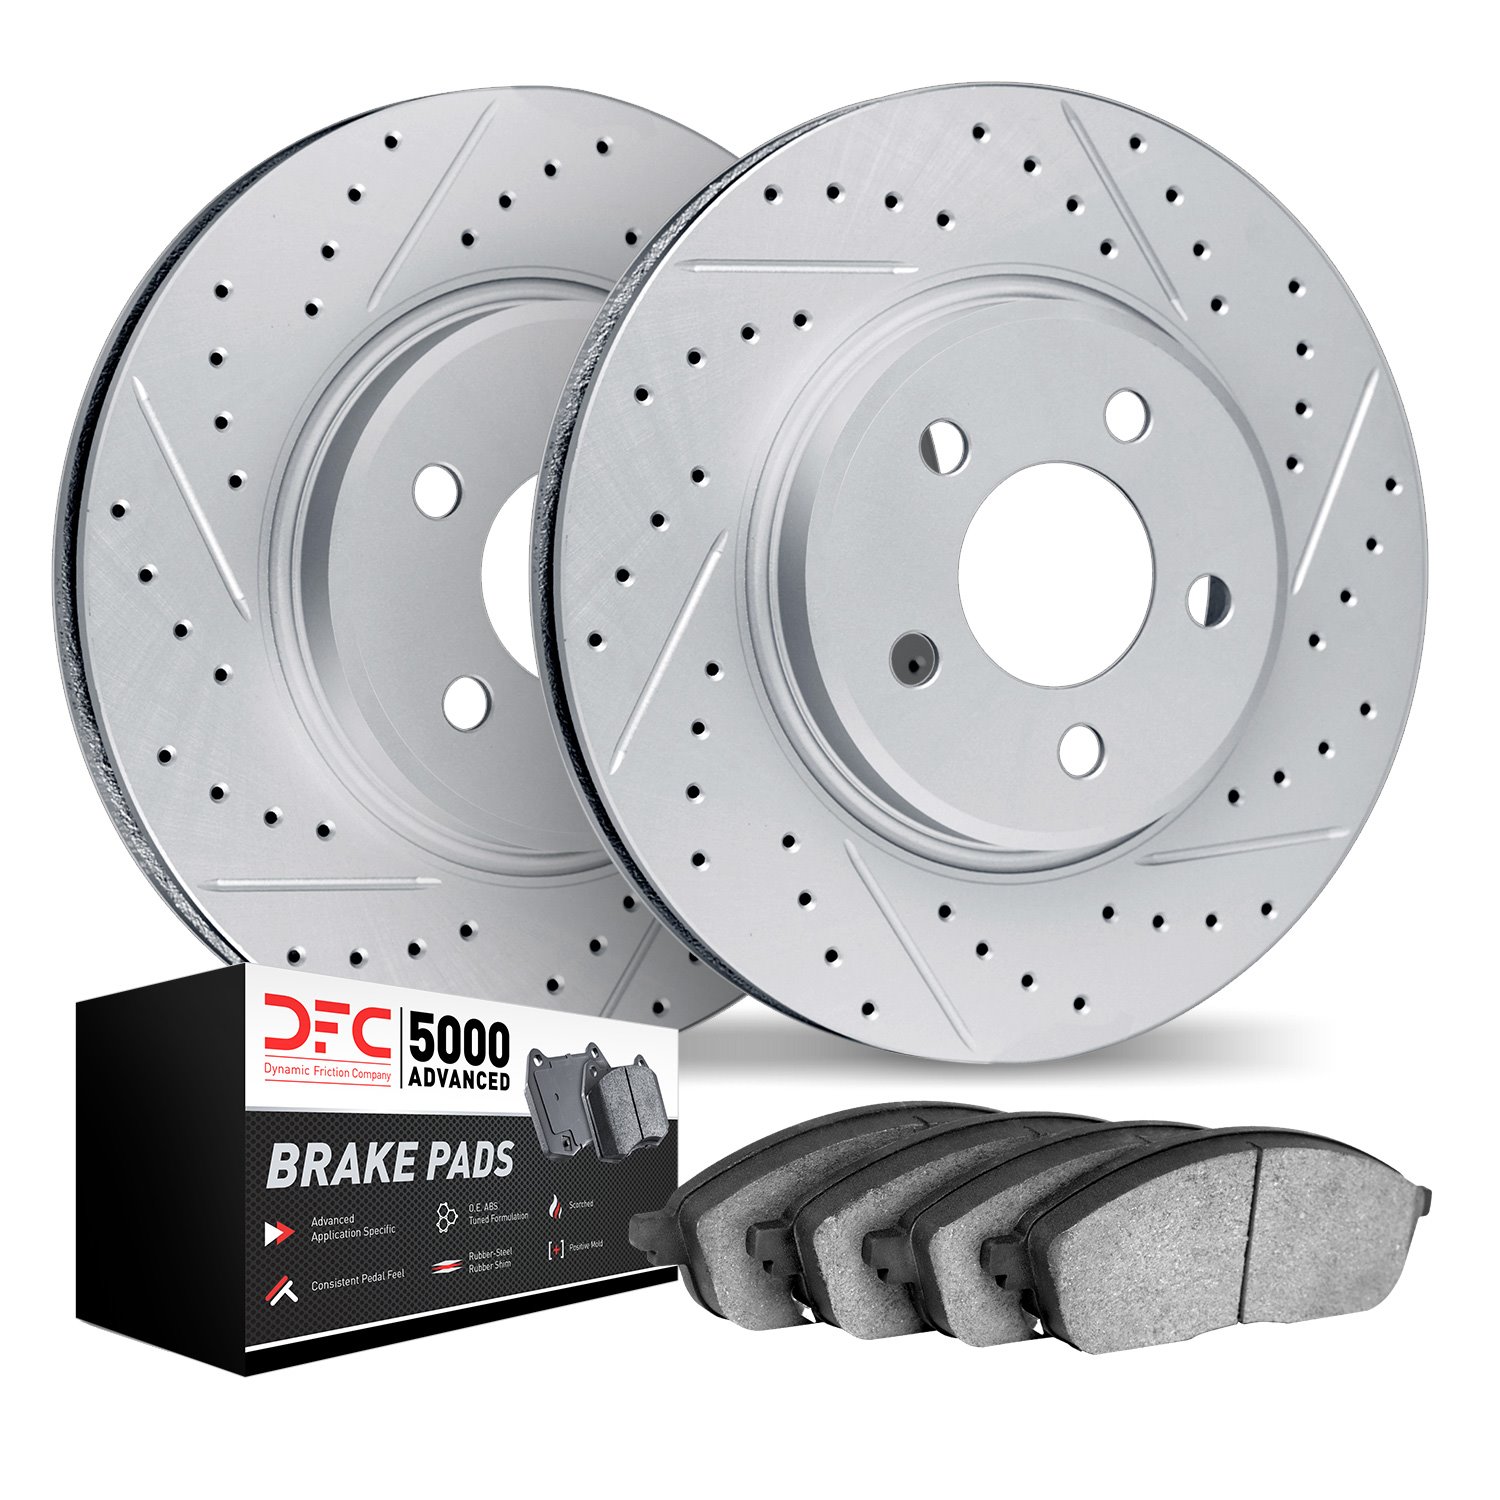 2502-73078 Geoperformance Drilled/Slotted Rotors w/5000 Advanced Brake Pads Kit, 2017-2020 Audi/Volkswagen, Position: Rear